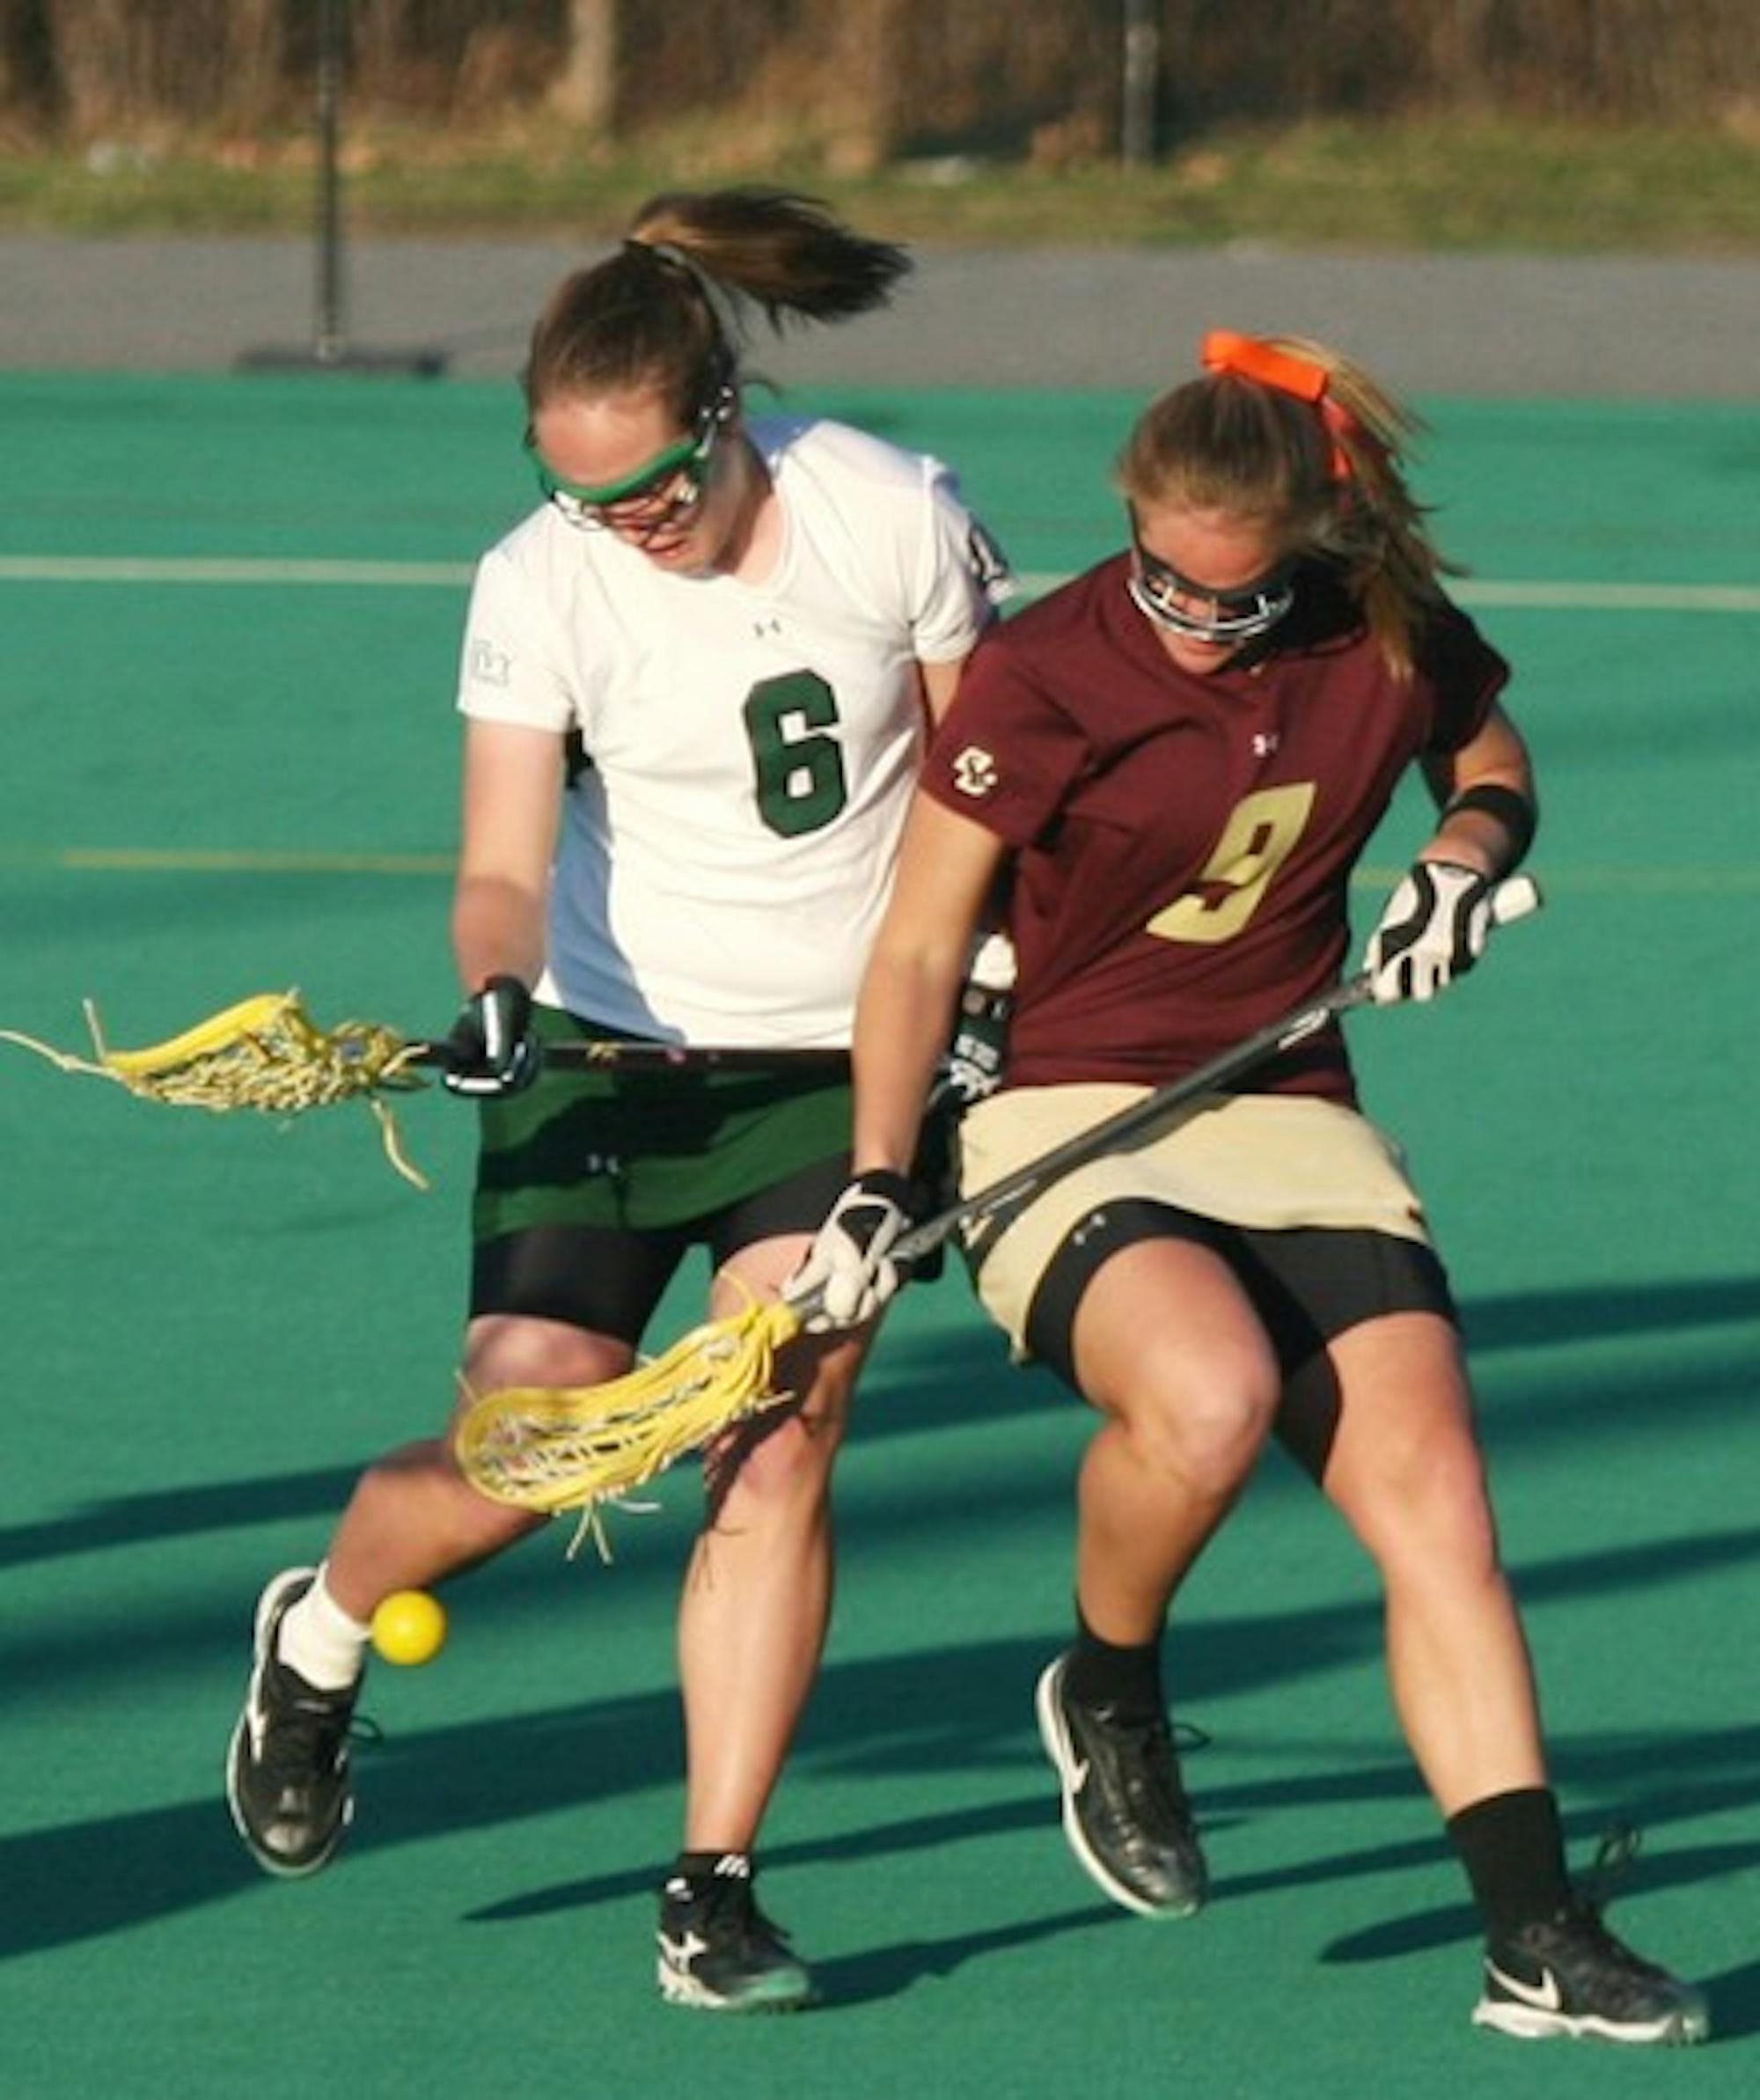 Colleen Olsen '10 was one of 36 lacrosse players selected for the U.S. national women's team.